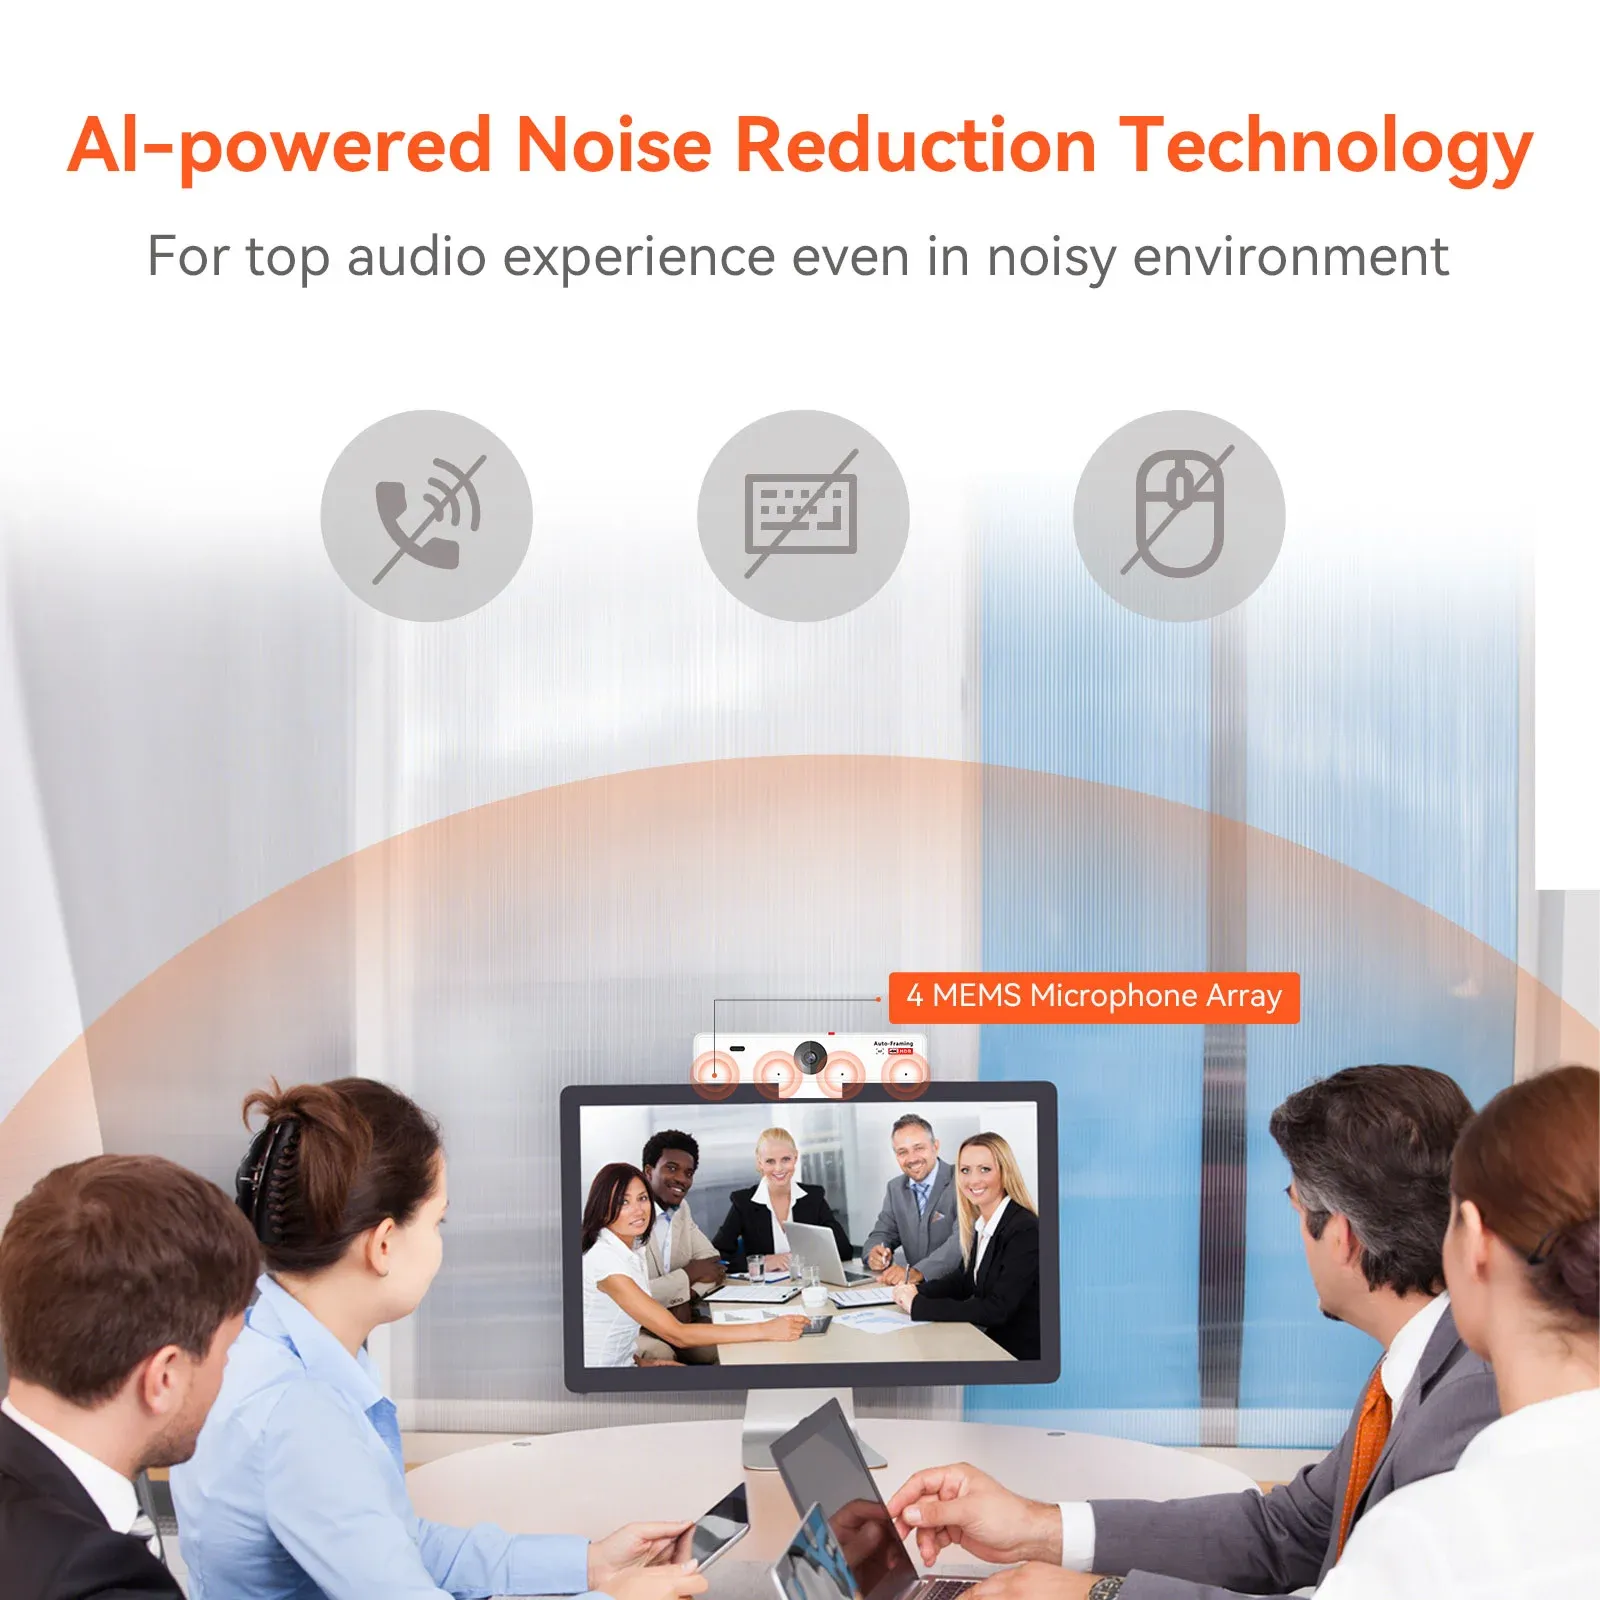 Patented ProperClean Technology With AI Noise-cancelling Algorithms